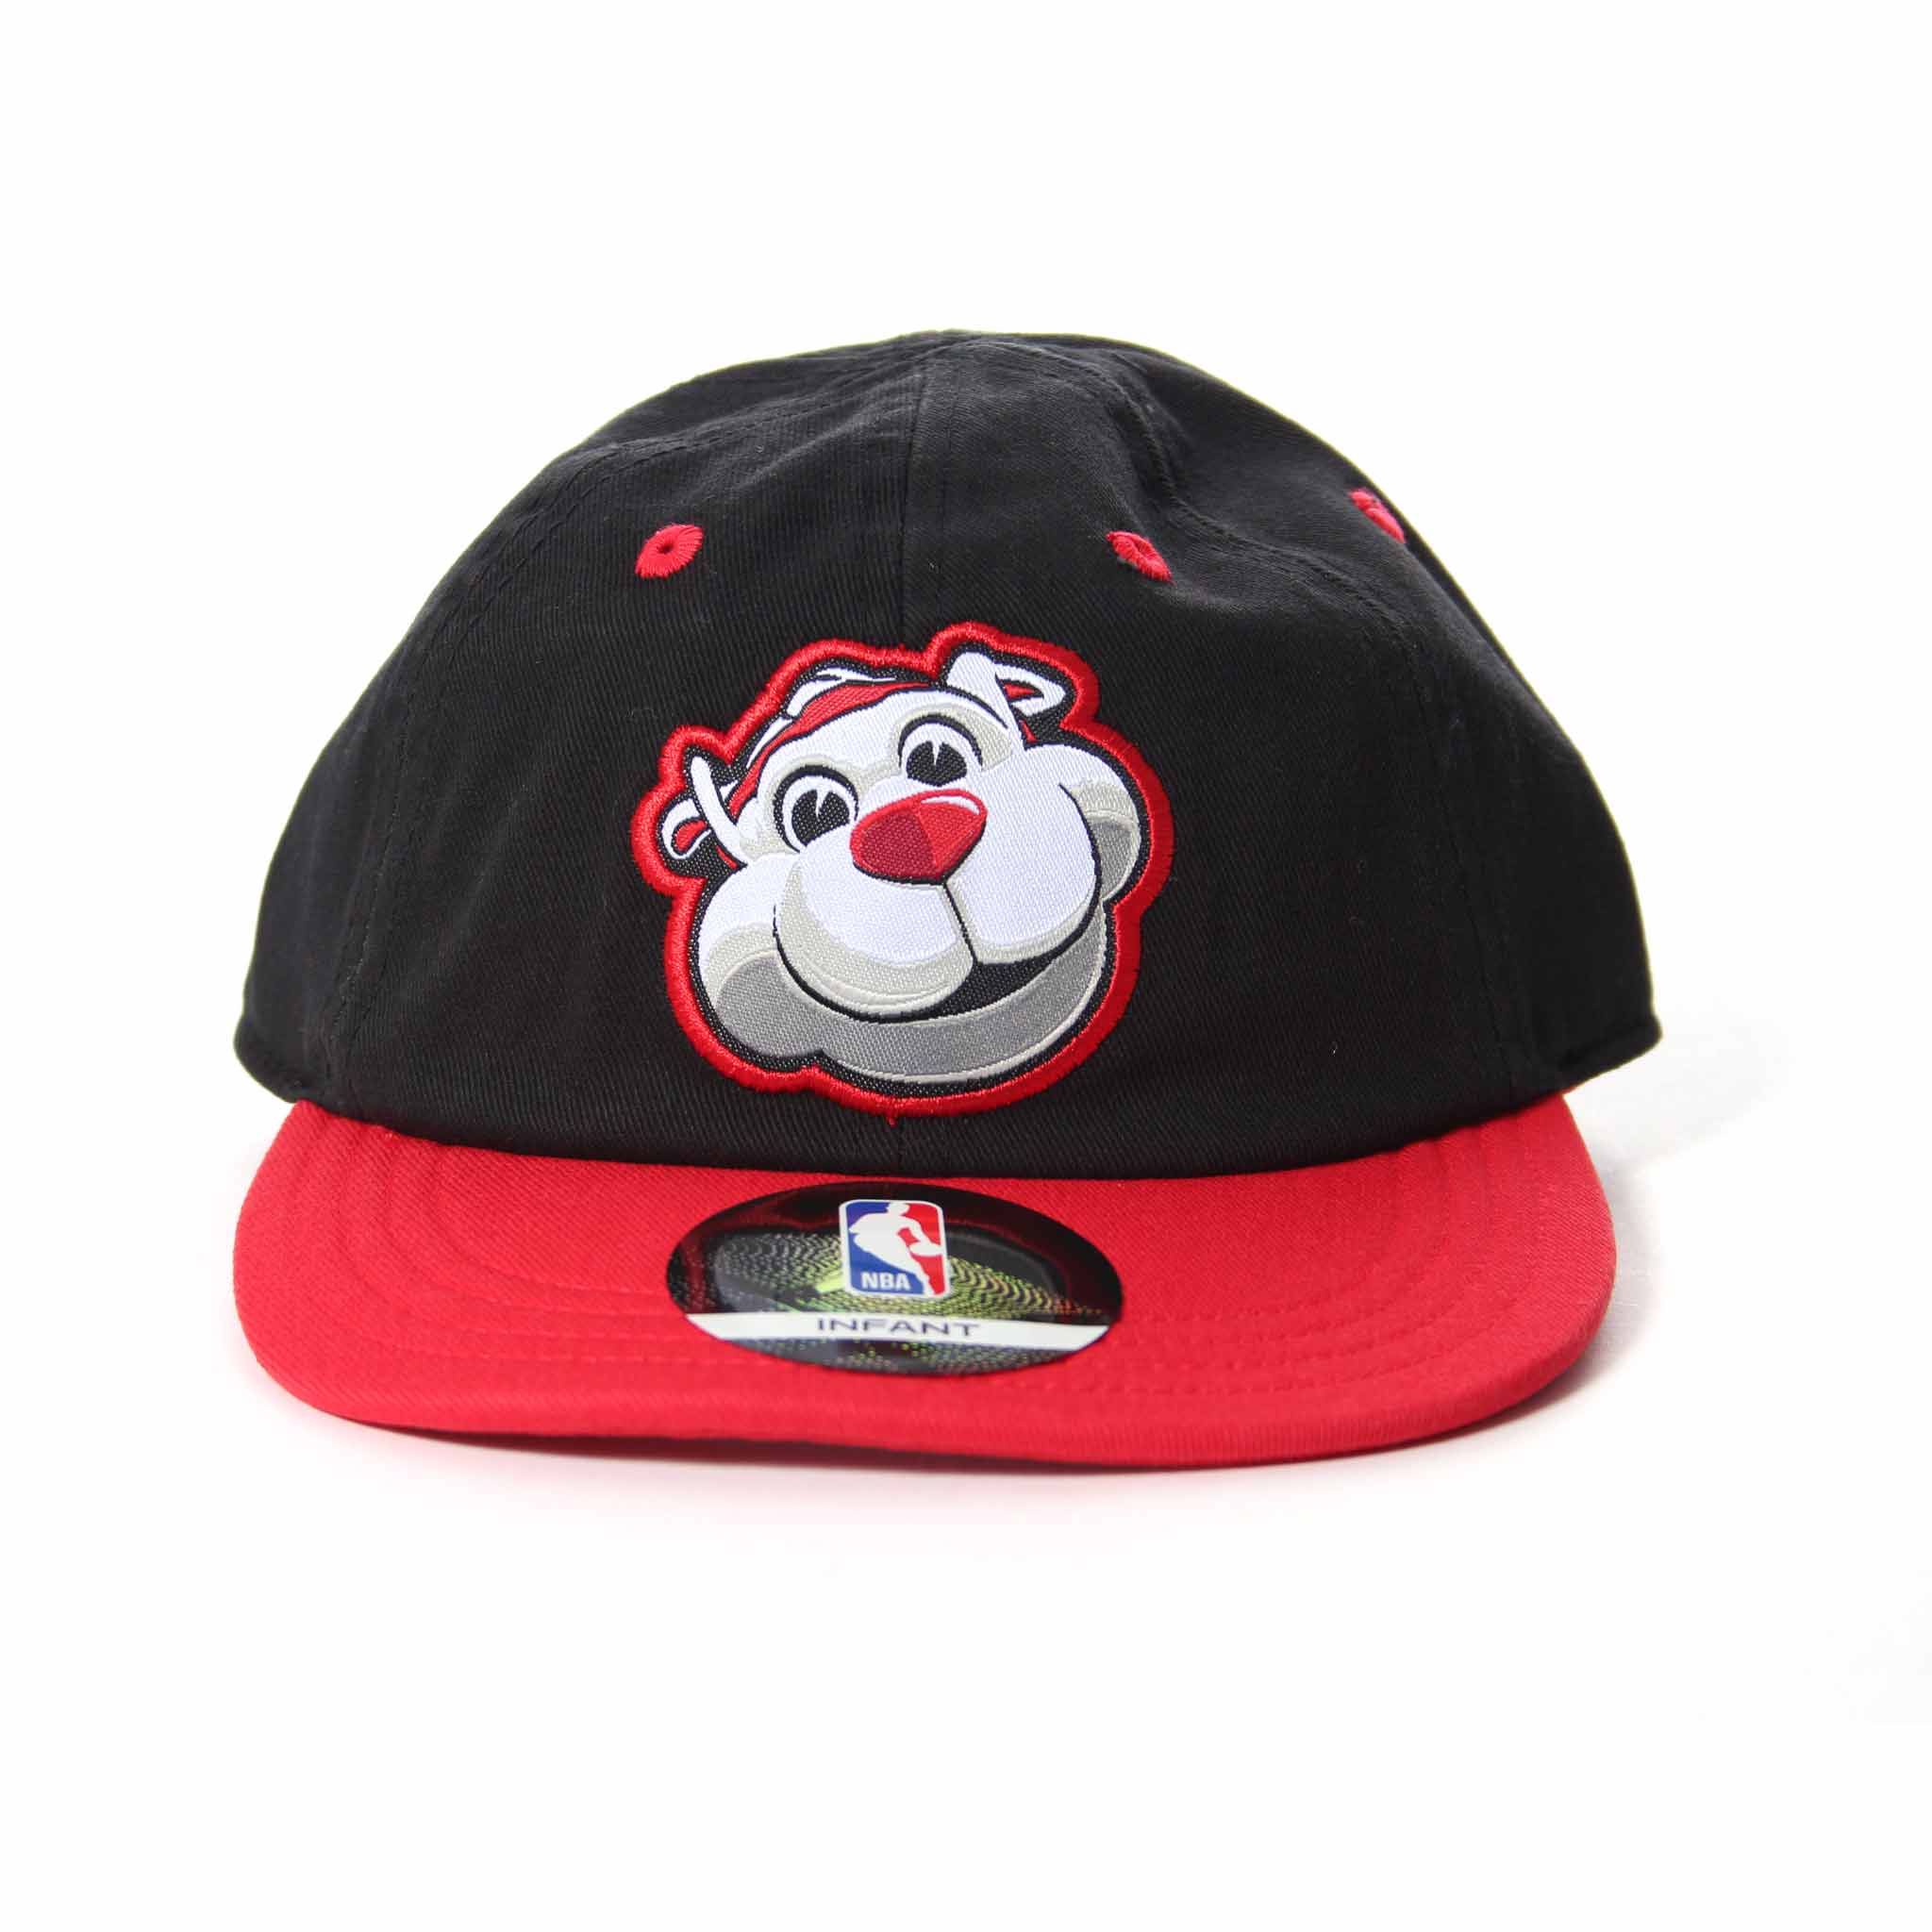 Trail Blazers Outerstuff Mascot Slouch Infant's Adjustable Cap - Rip City